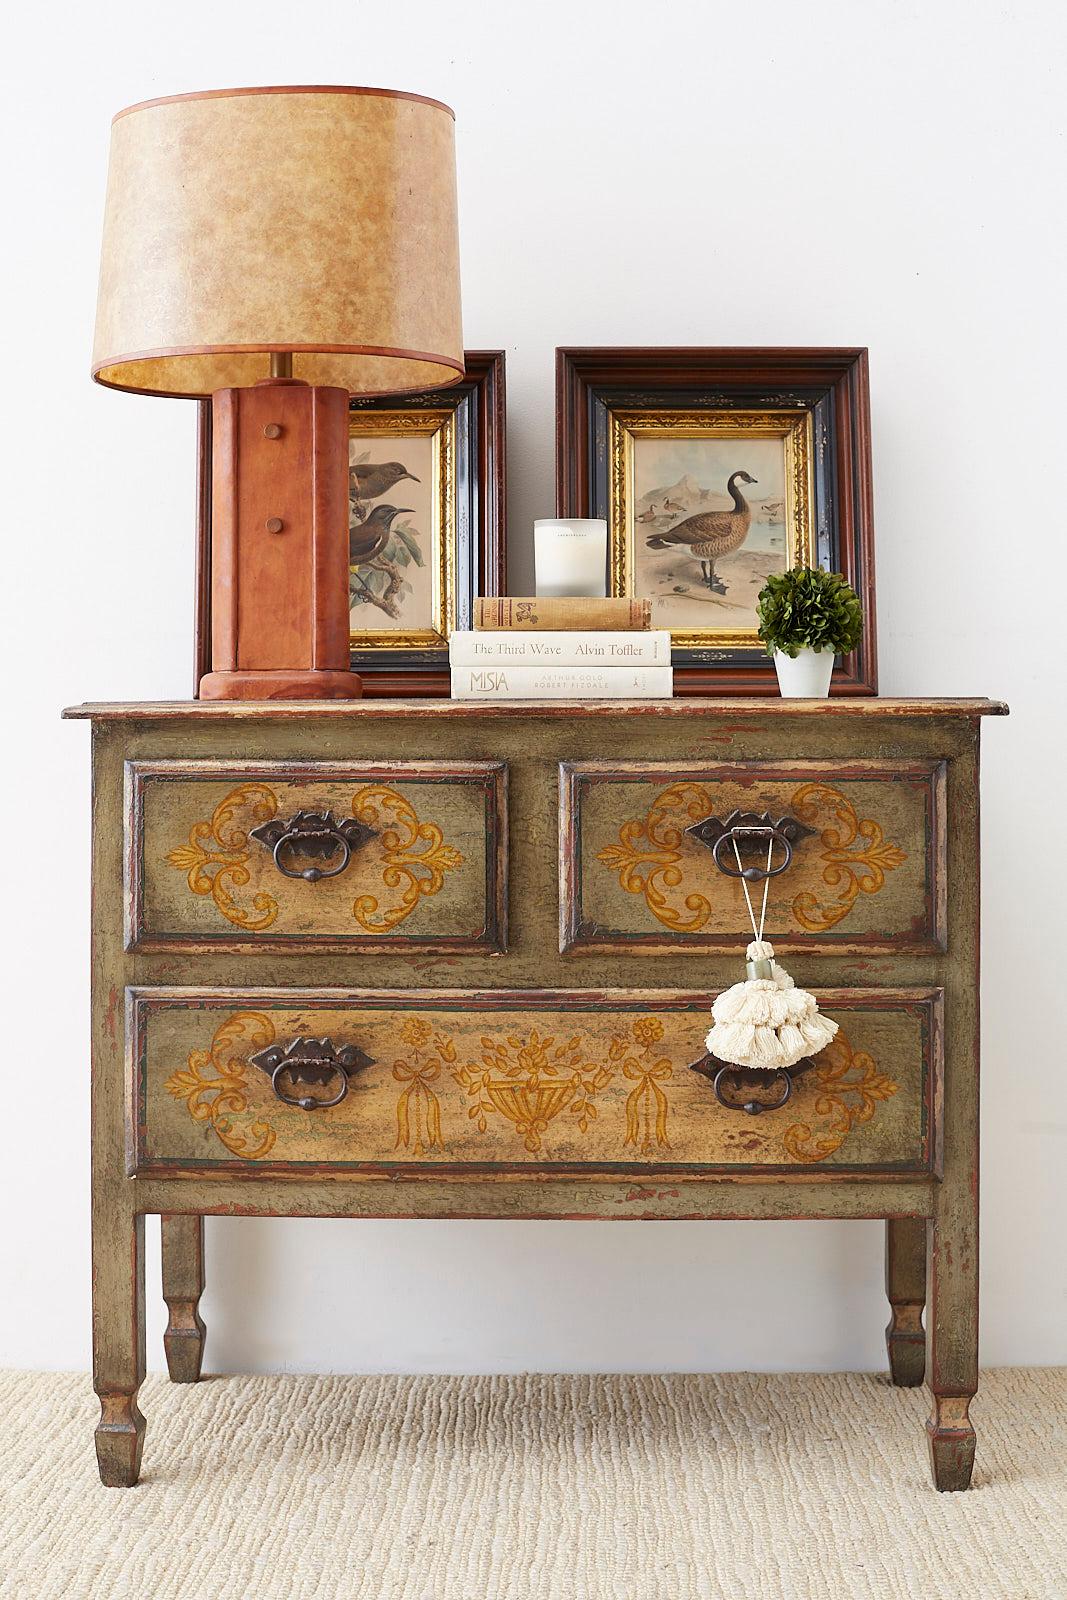 Distinctive painted three drawer commode or chest of drawers featuring a hand painted lacquer finish. Decorated in the Italian neoclassical taste on three sides and top with acanthus, urn and floral motifs. Constructed from hardwood with rustic iron